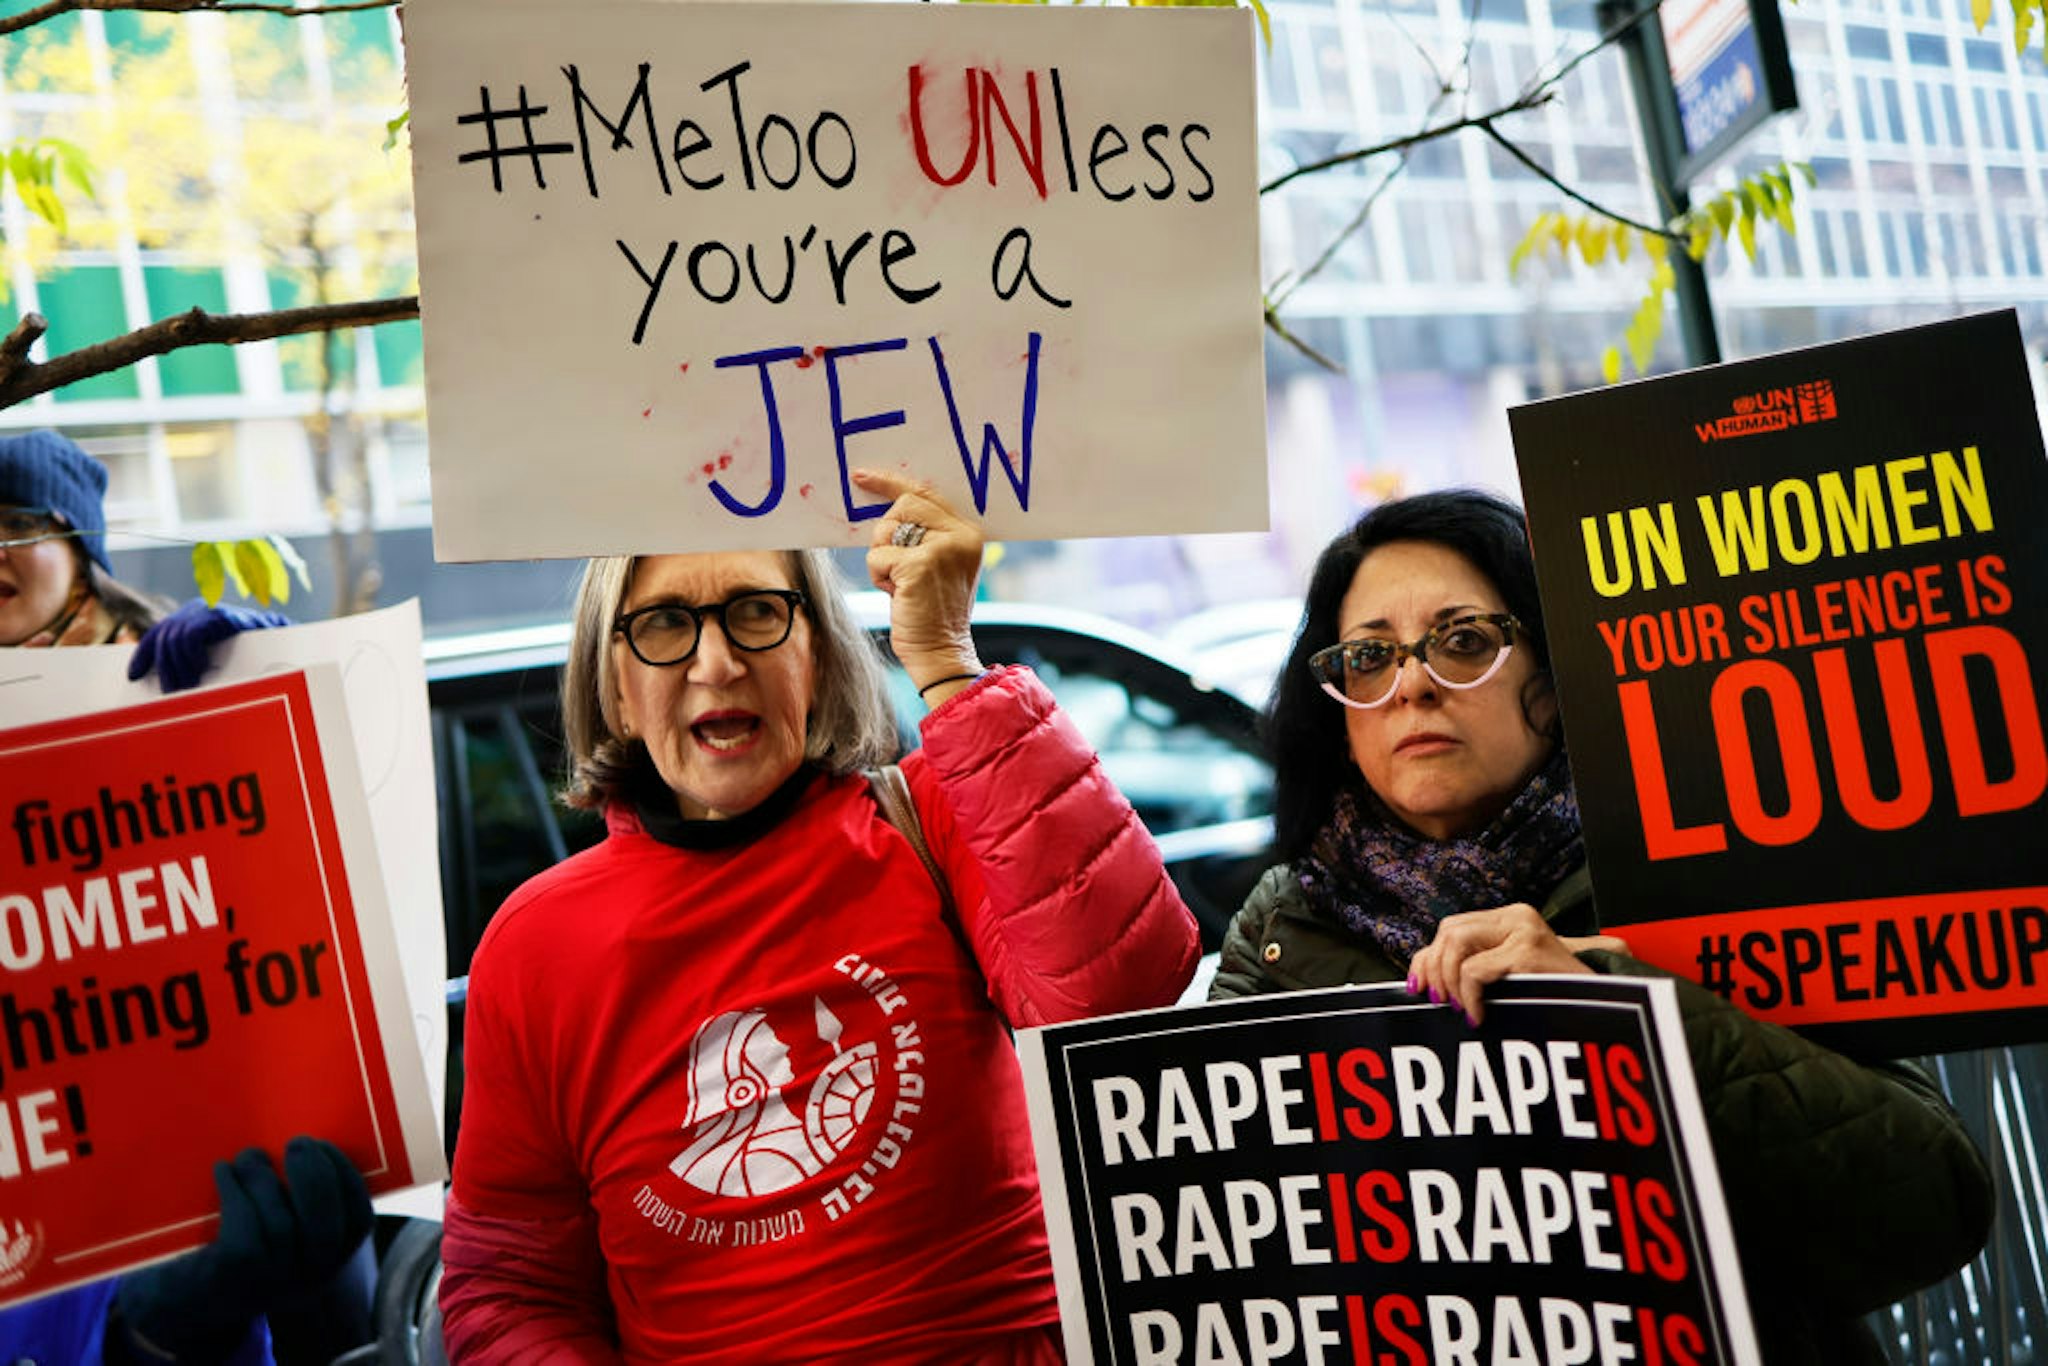 NEW YORK, NEW YORK - NOVEMBER 27: Protestors gather at the offices of the United Nations Women on November 27, 2023 in New York City. The group Bring Them Home Now held a protest to observe International Day for the Elimination of Violence against Women to bring attention to the Israeli women who were allegedly raped during the terror attack by the militant group Hamas on October 7th. (Photo by Michael M. Santiago/Getty Images)